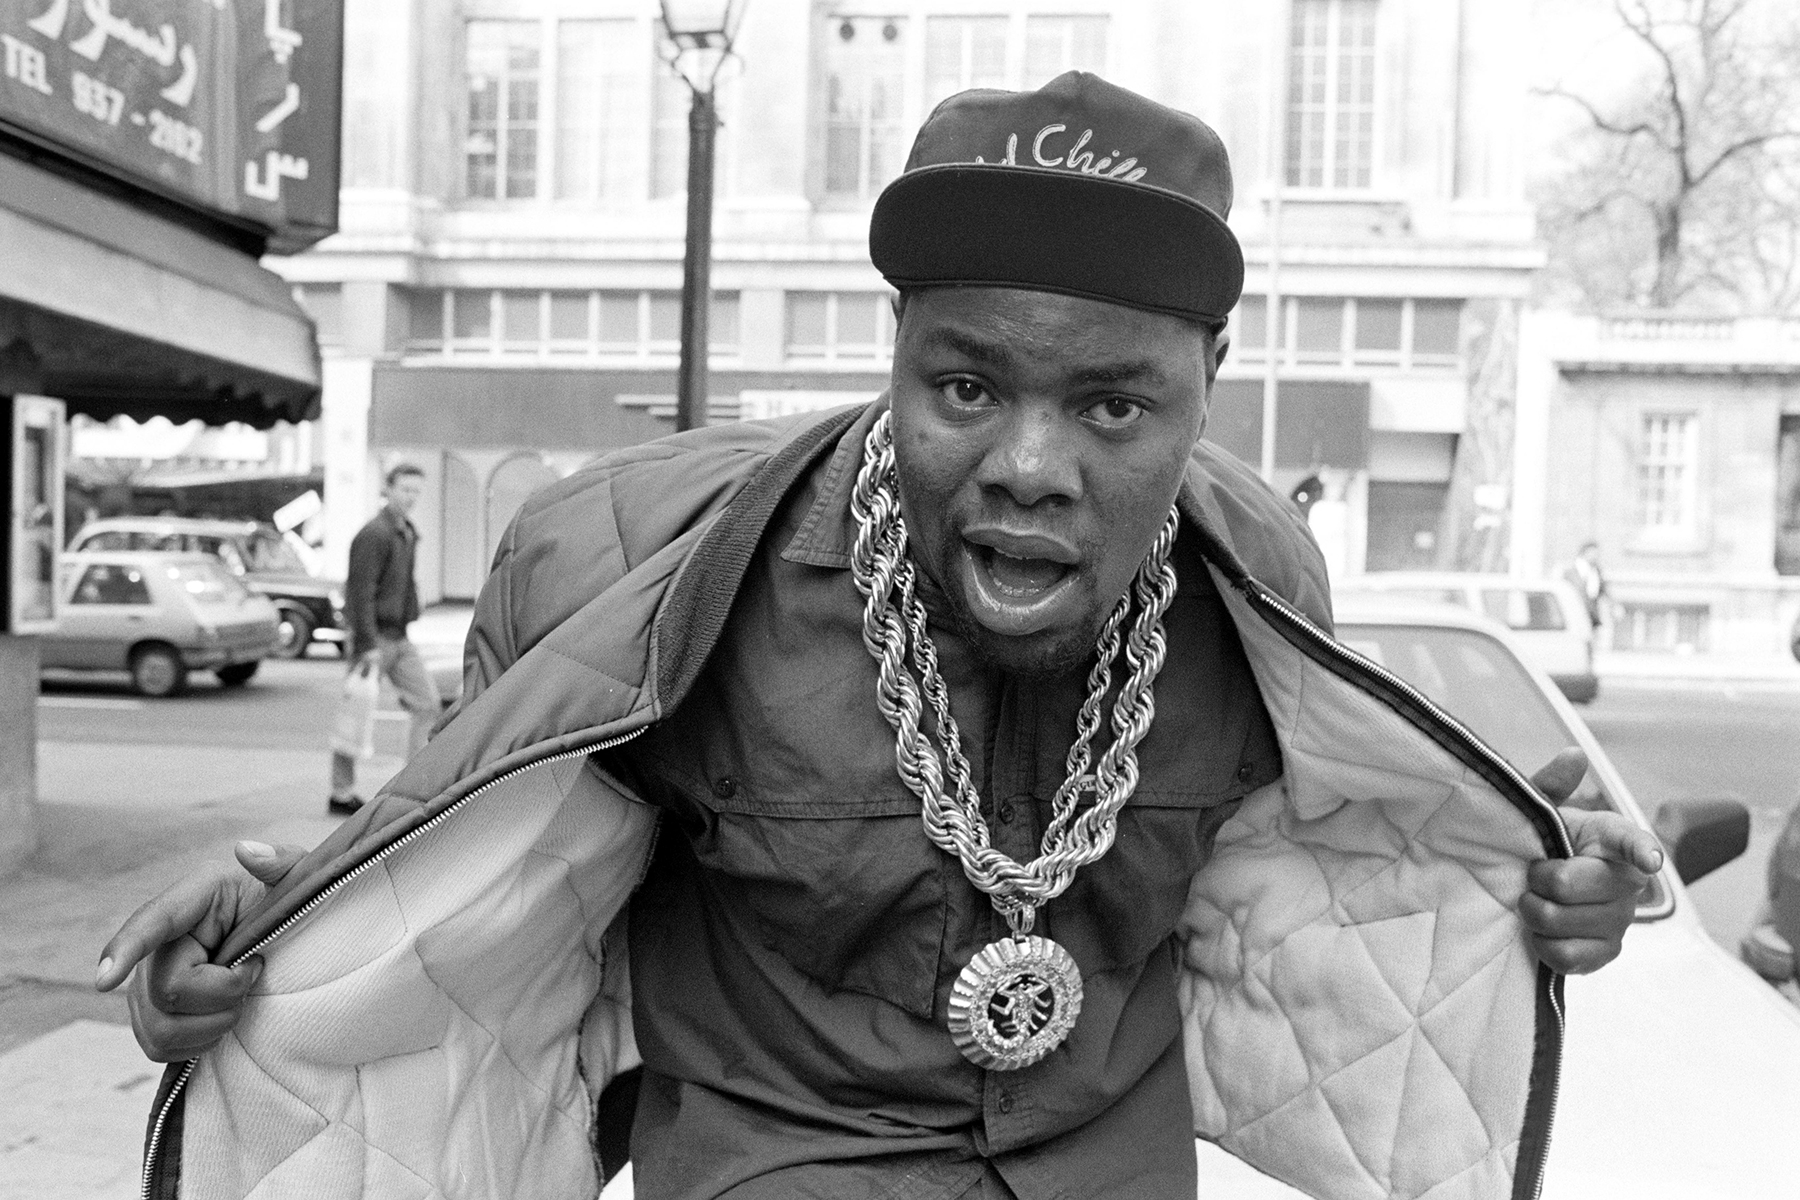 Farewell, Biz Markie: Remembering the Wild-Style Chaos and Diabolical Genius of Hip-Hop’s Old-School Joker King